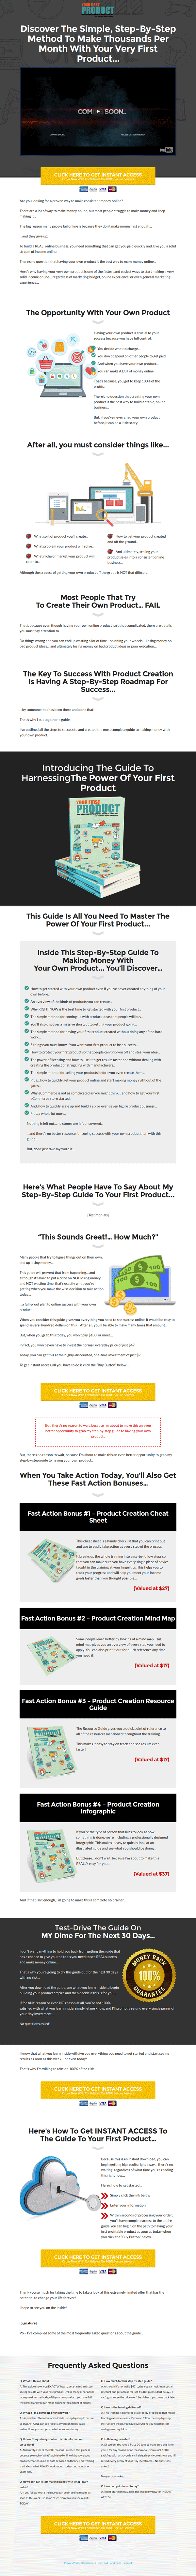 create your first physical product ebook and videos